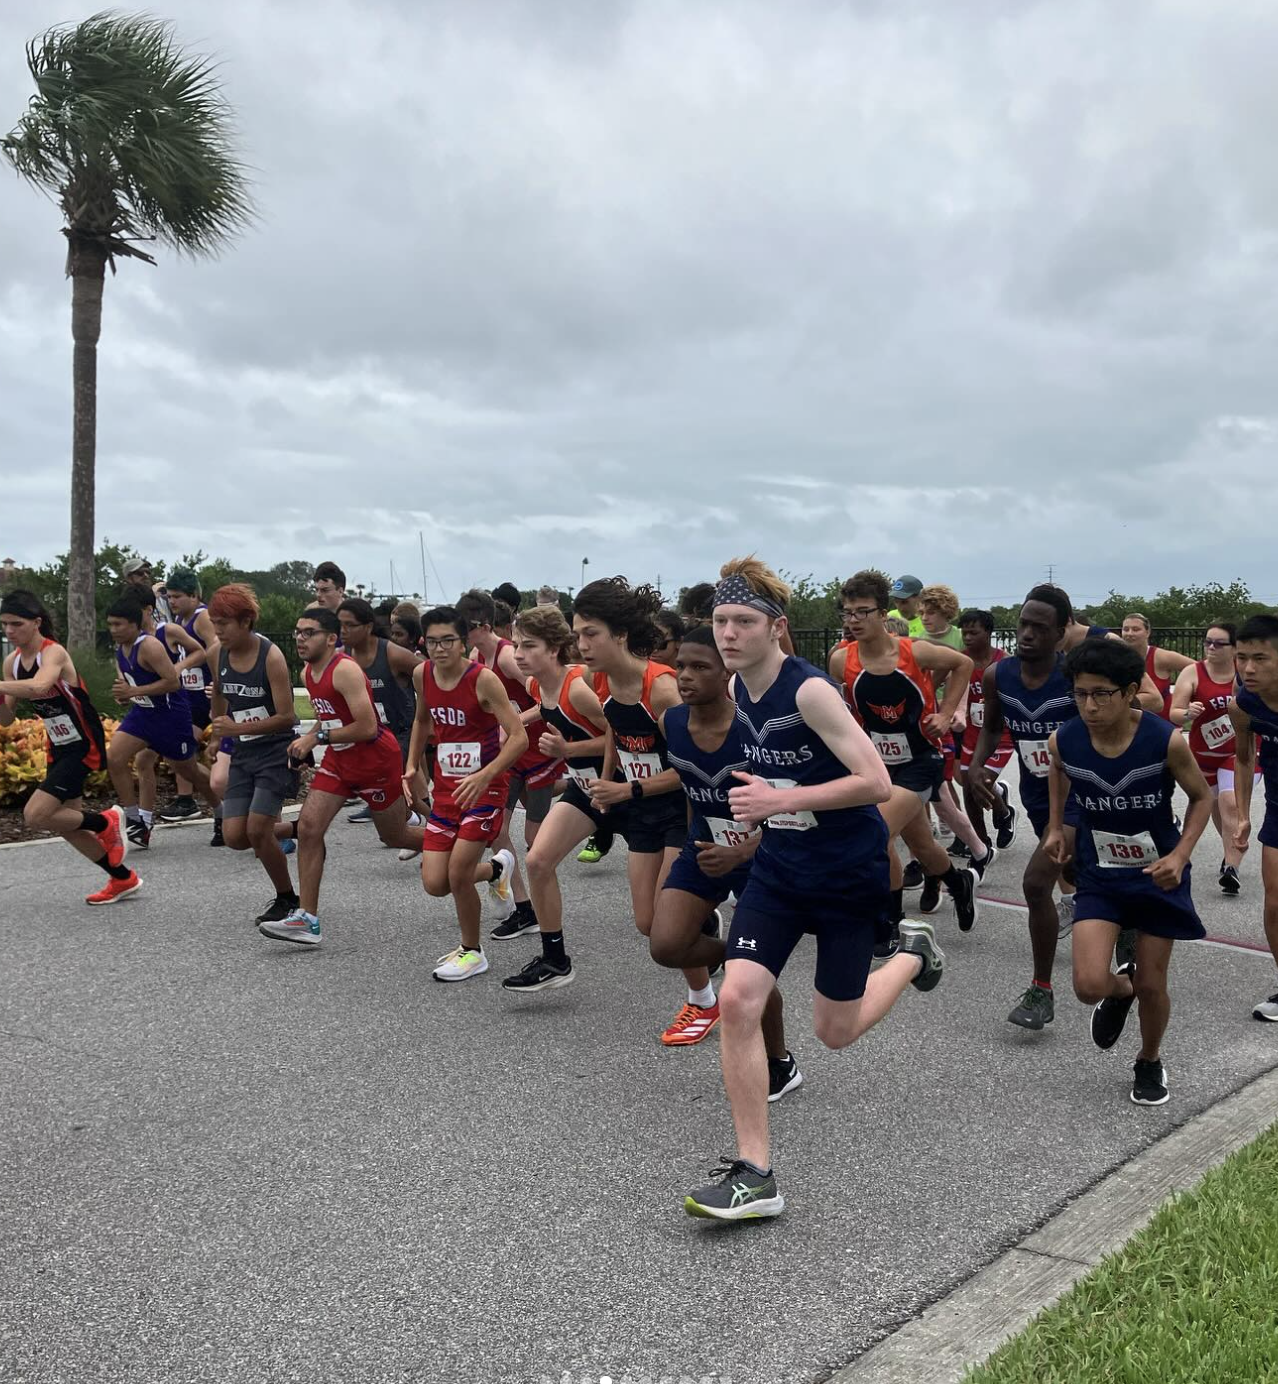 The background is cloudy with one palm tree. Different teams with different colors (red, navy, orange, and black) are on run. 